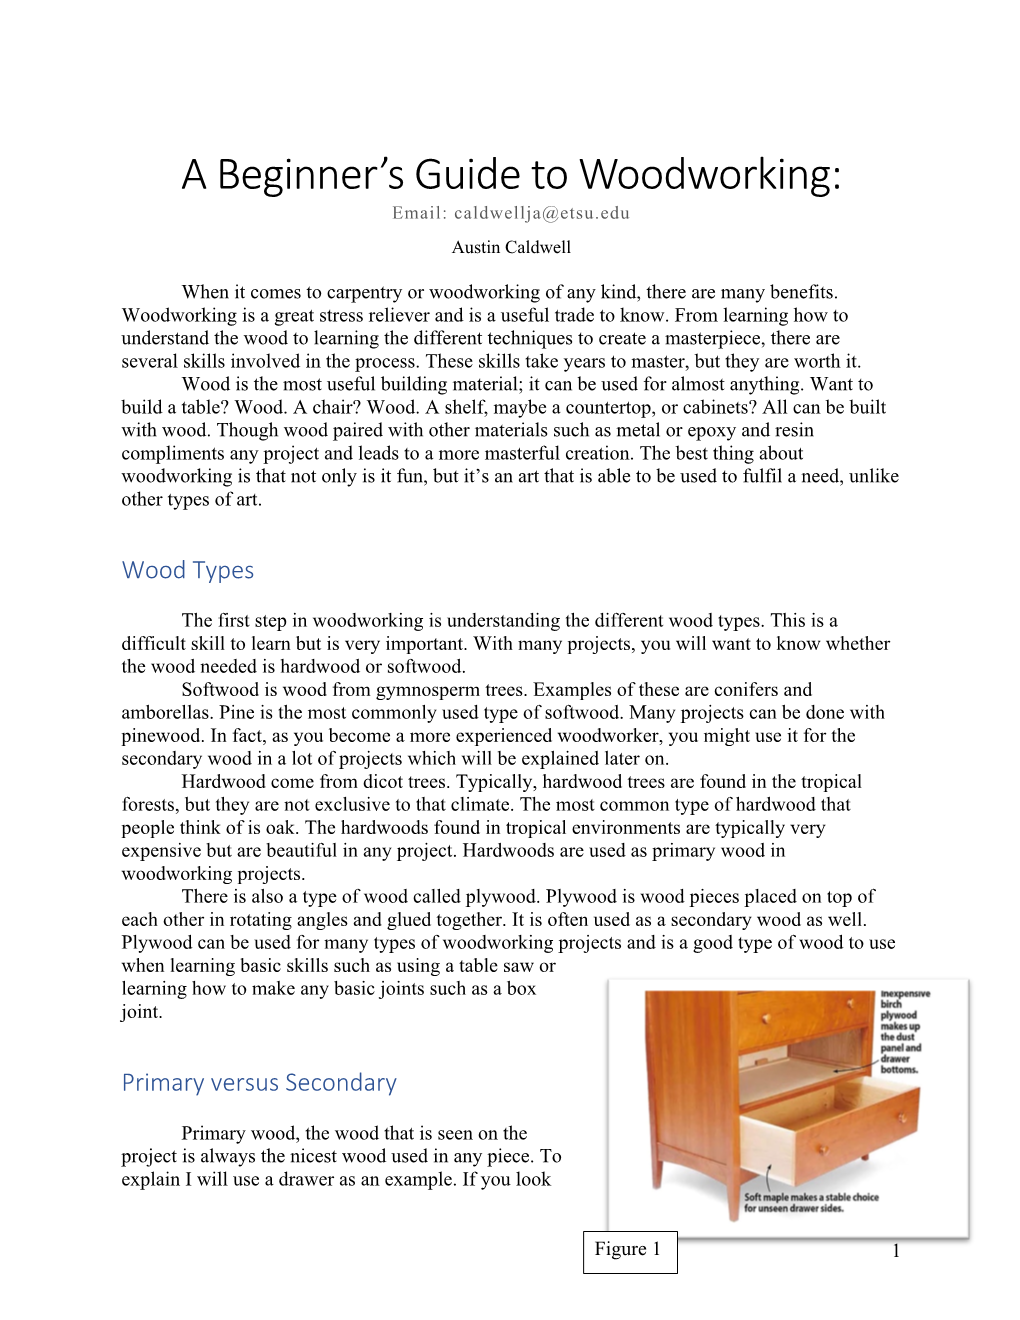 A Beginner's Guide to Woodworking